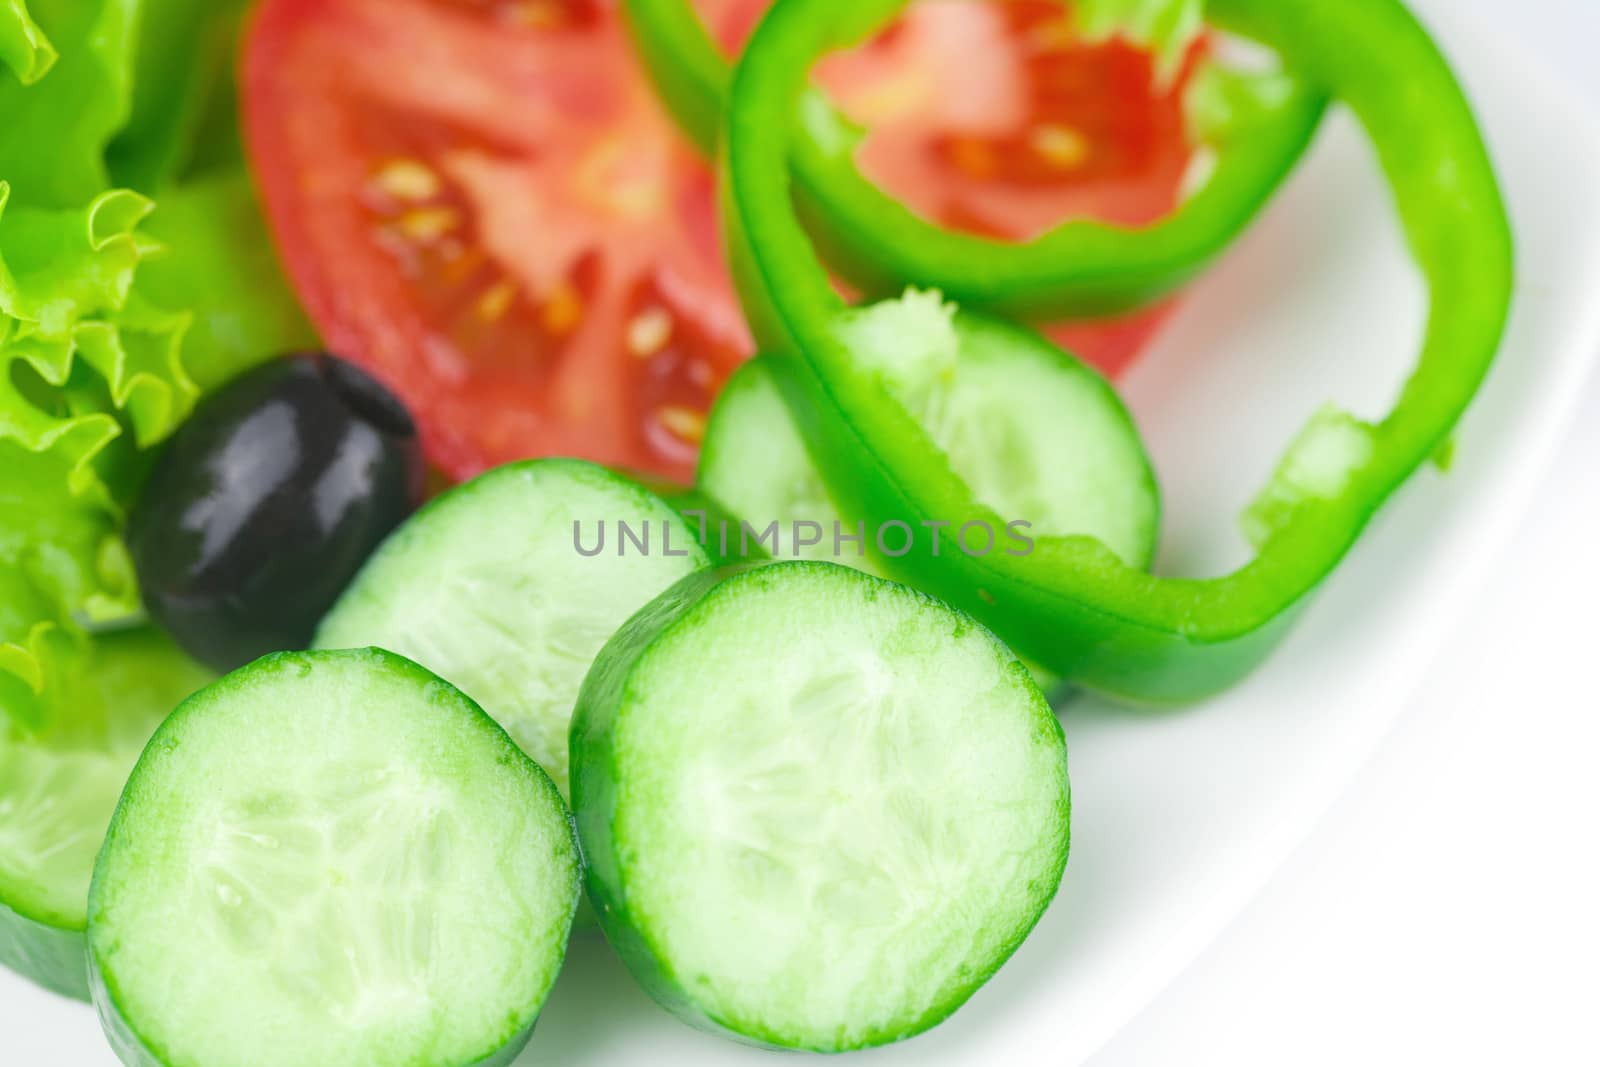 black olive,lettuce, tomato, cucumber and pepper in a bowl